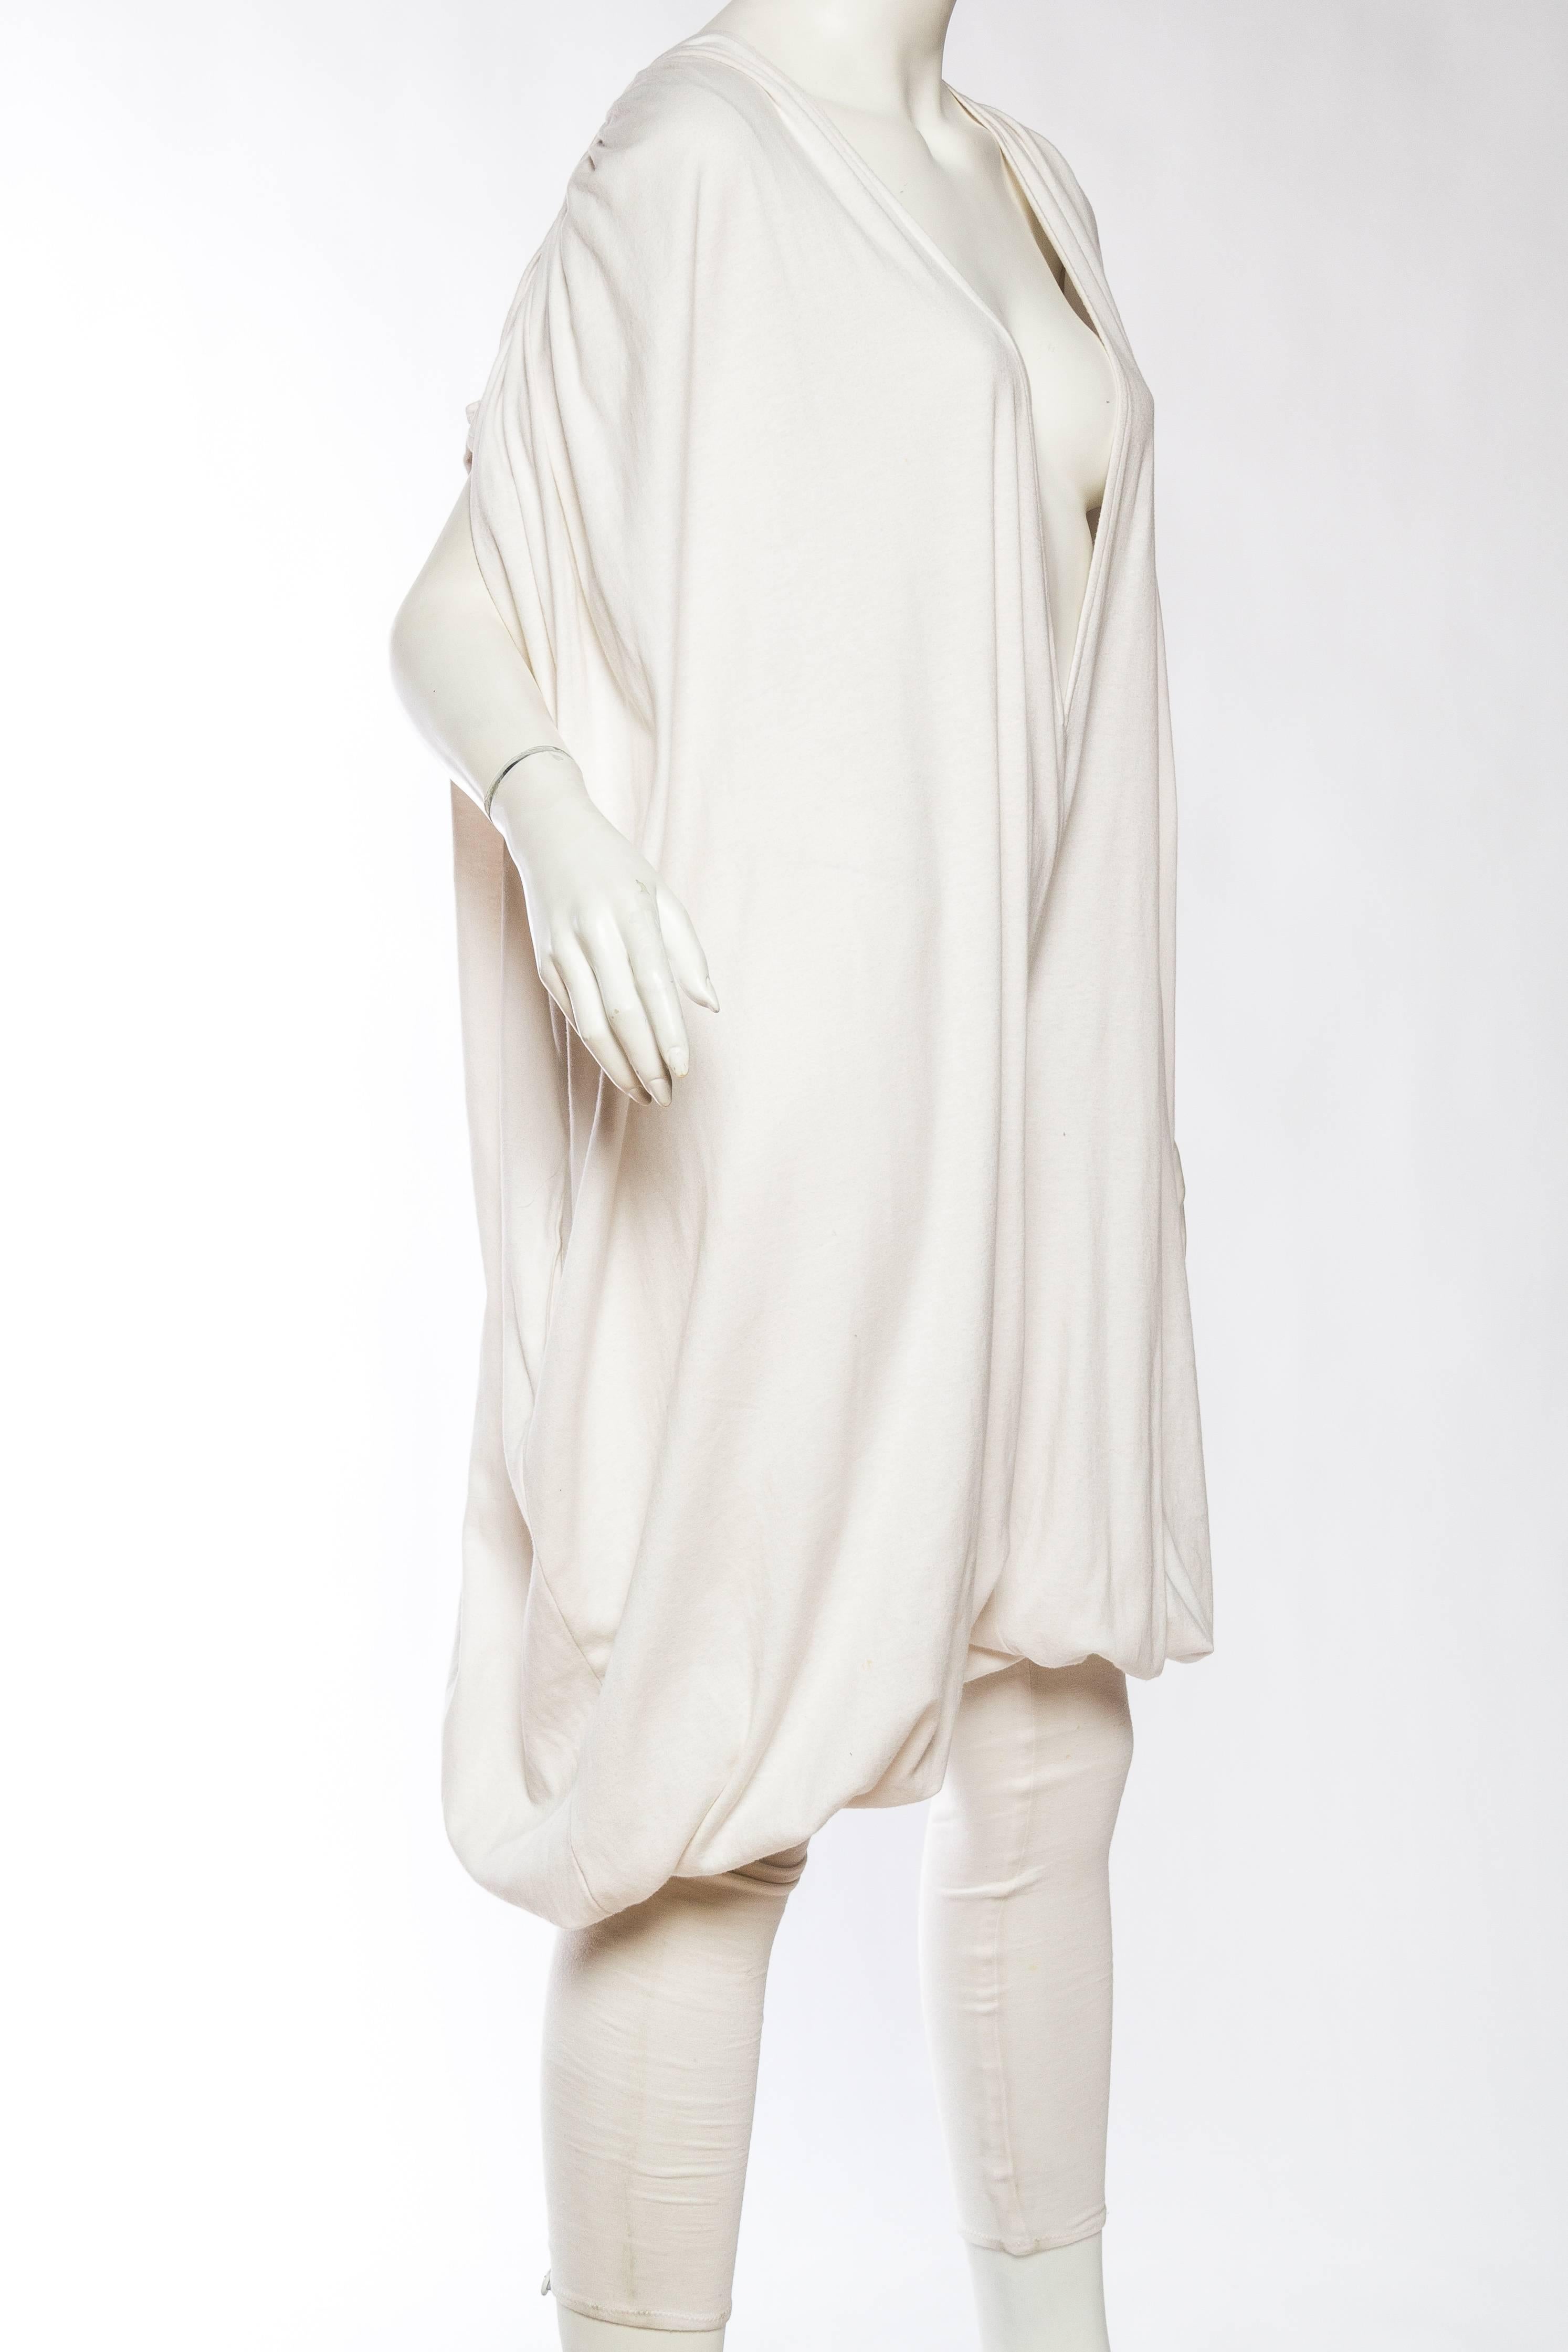 Early Norma Kamali from the 1970s Volumunous White Cotton Jersey Jumpsuit In Good Condition In New York, NY